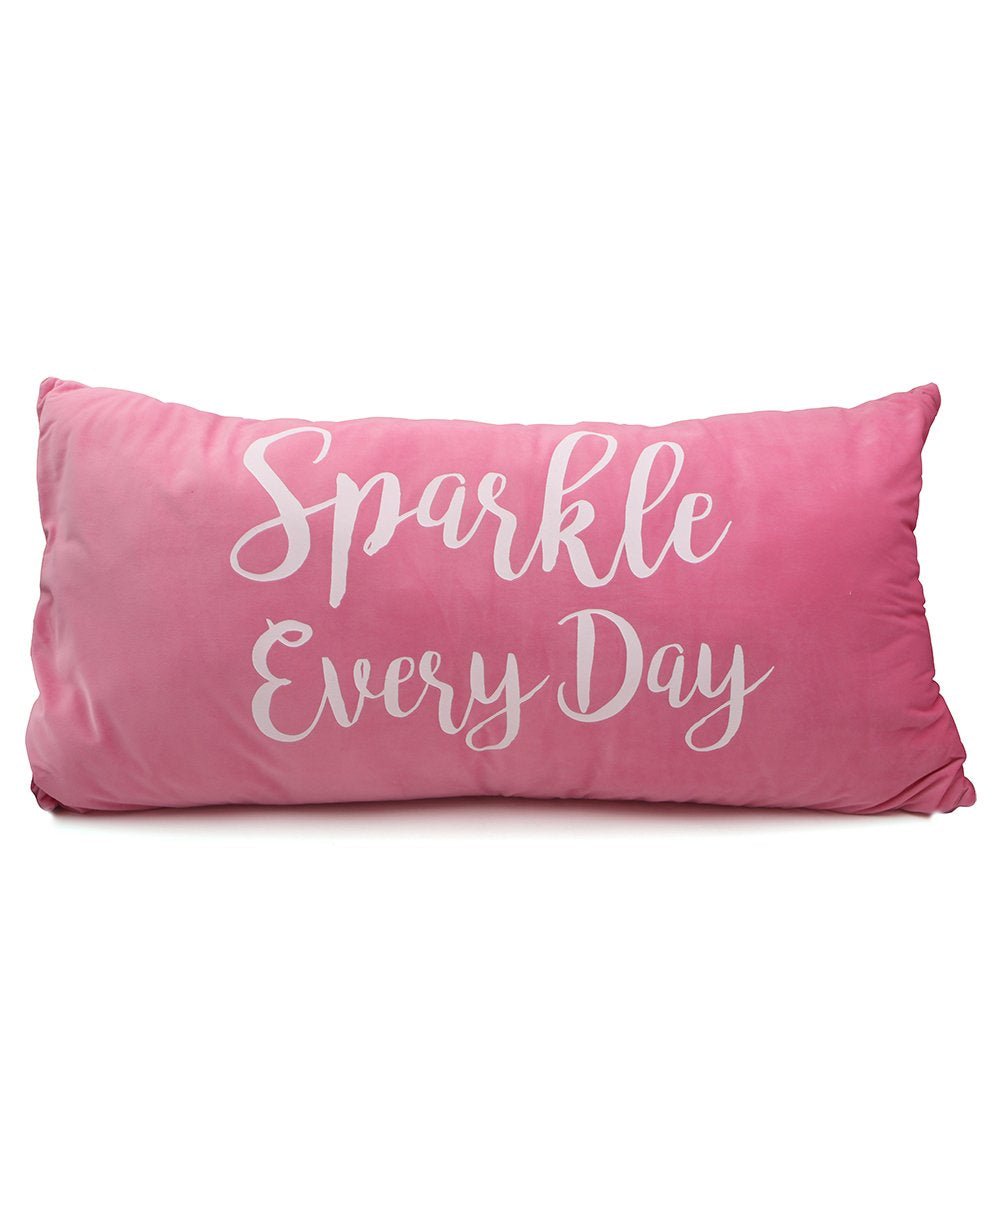 Sparkle Every Day Inspirational Pillow - Pillows - -